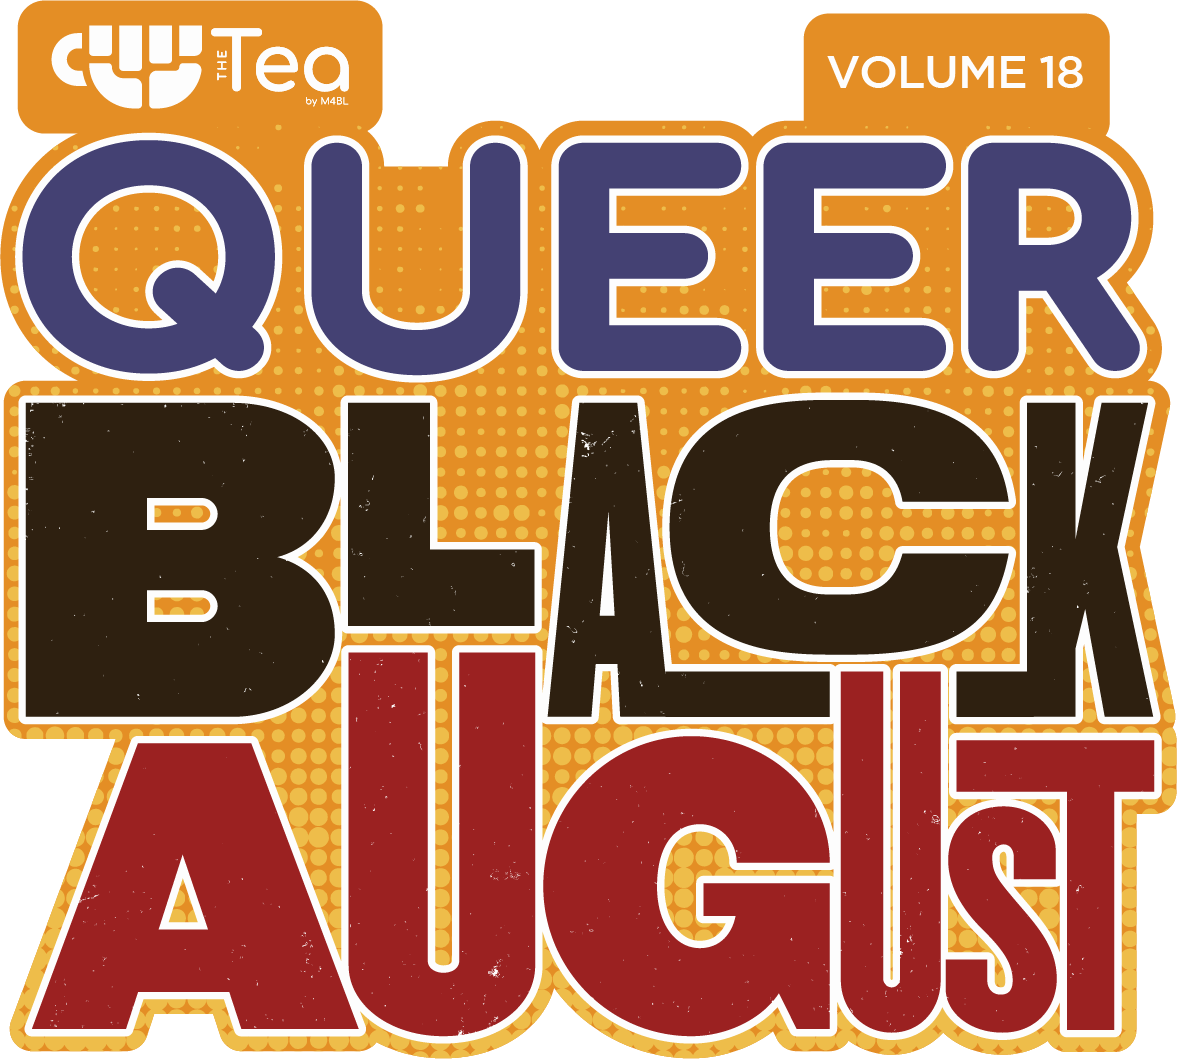 Queer Black August Issue